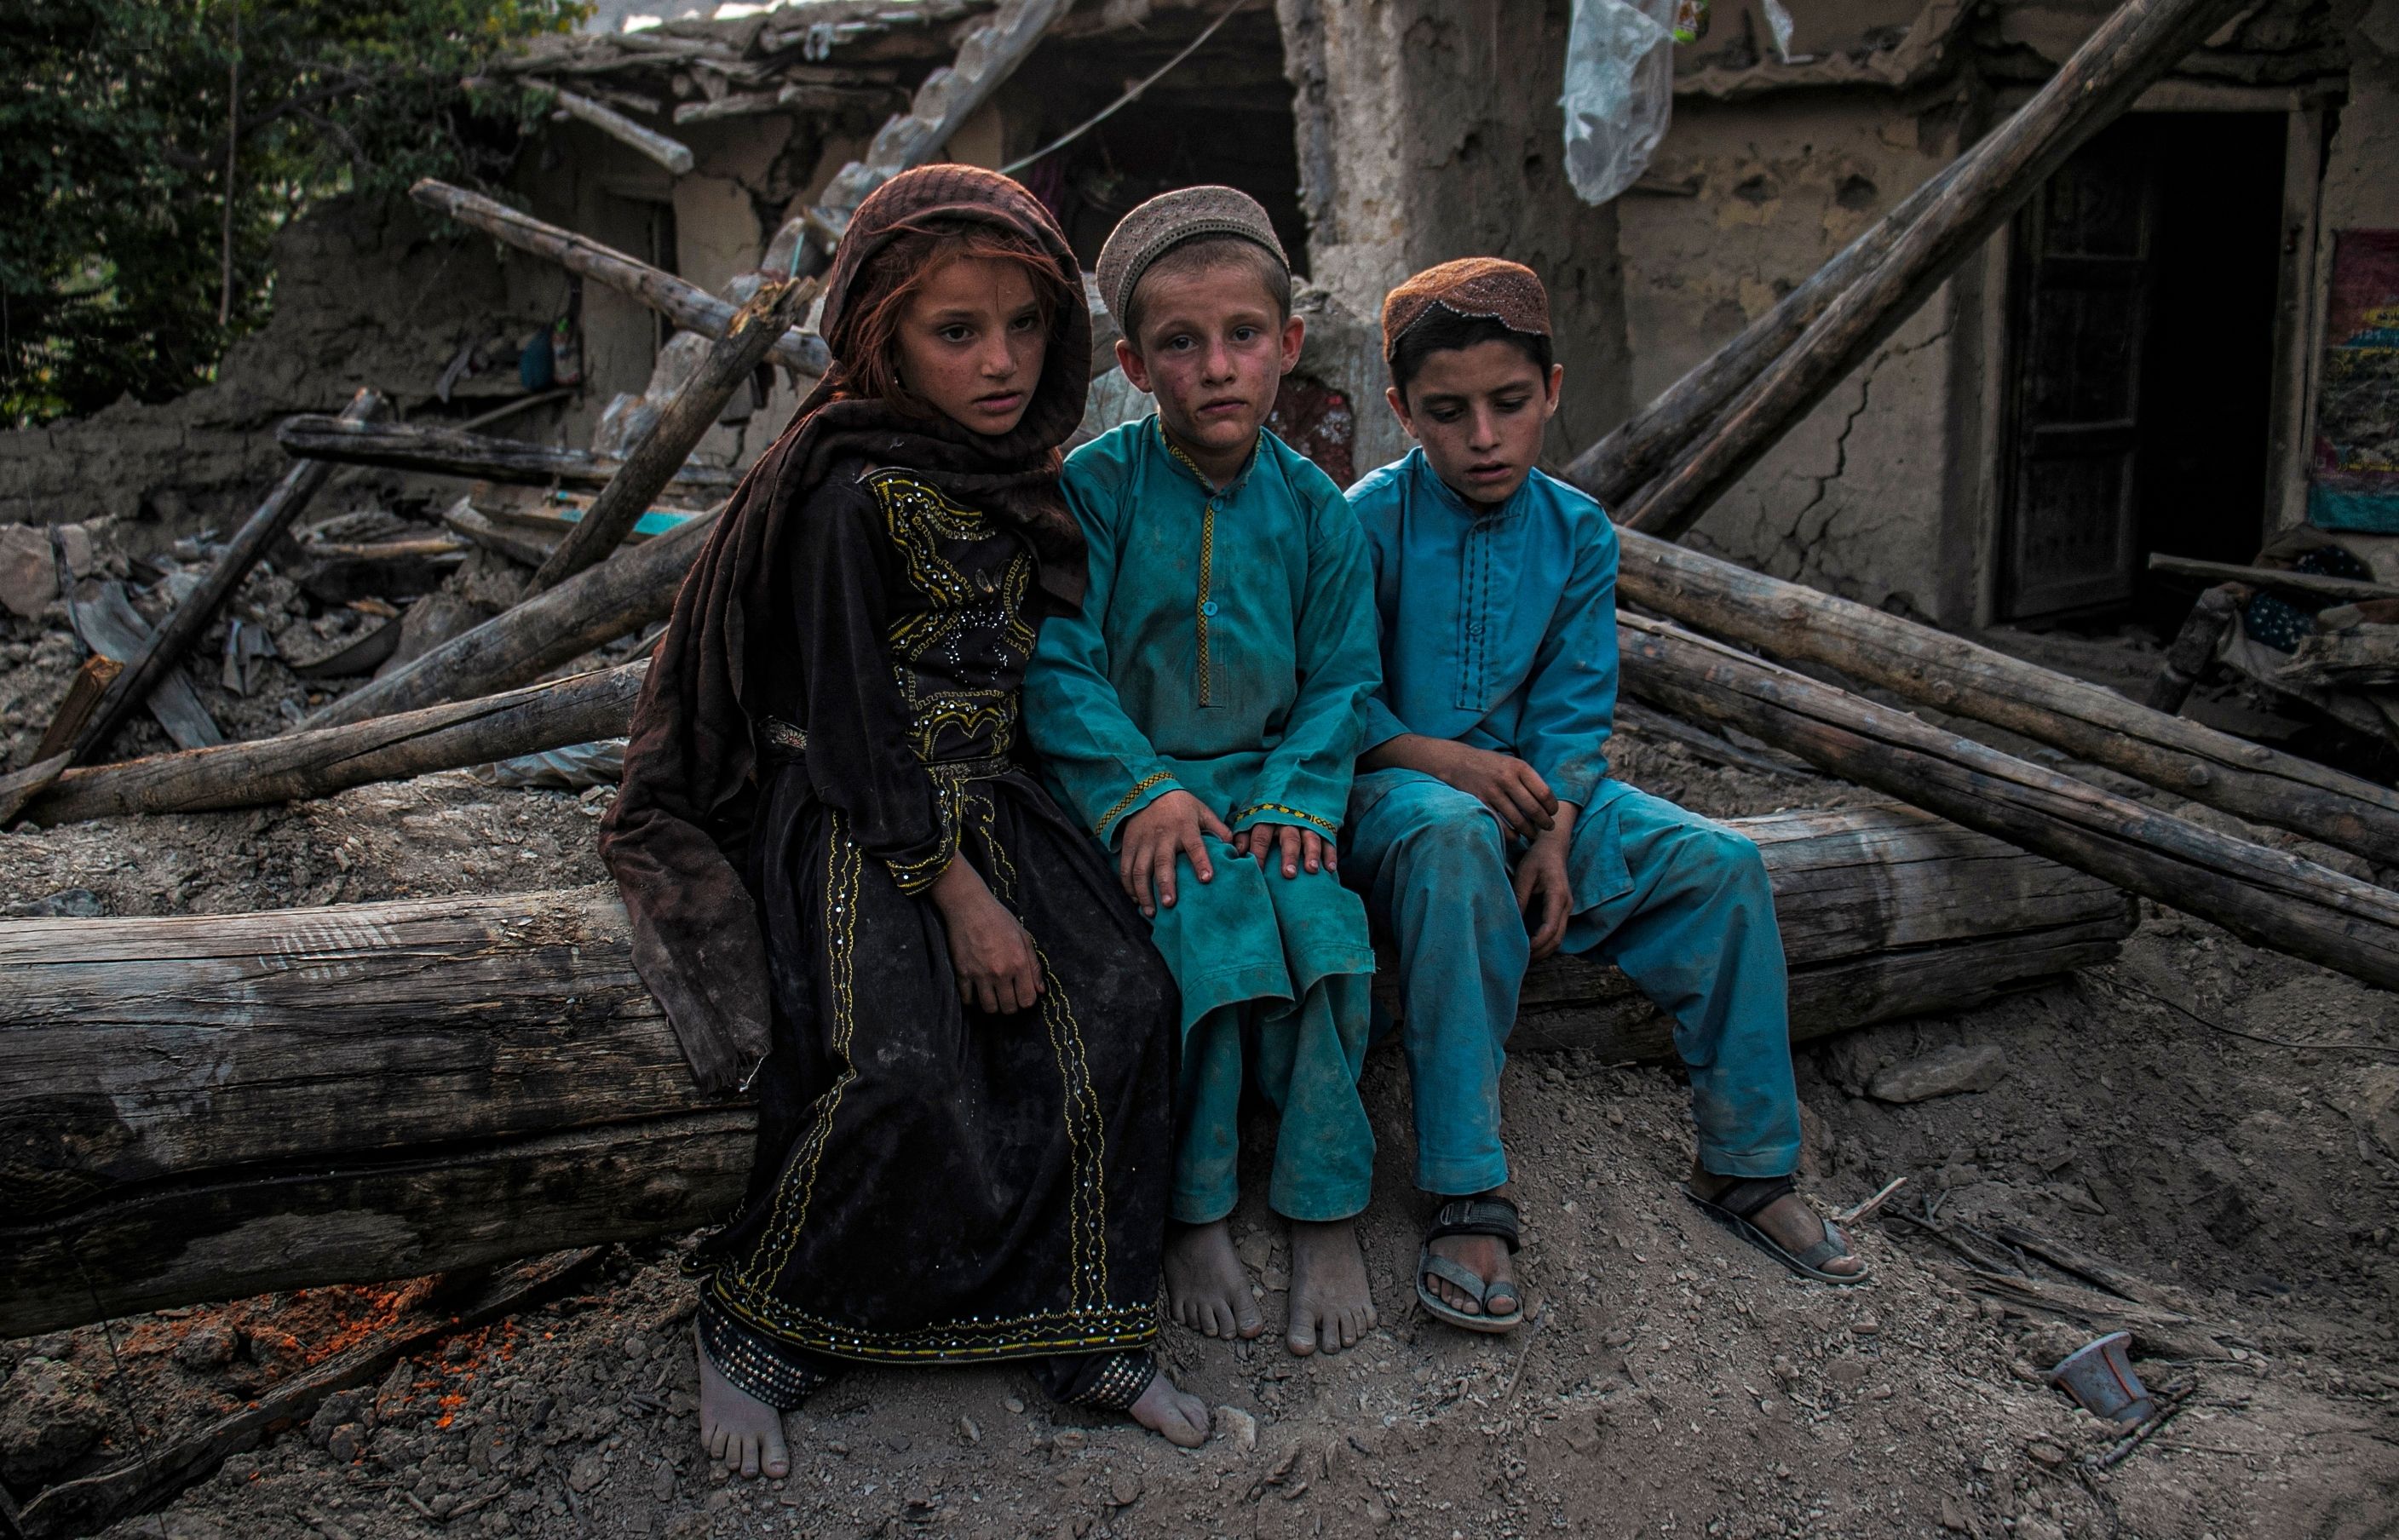 Poor and needy Afghan children sitting on the ground after an earthquake - Paktika, Afghanistan August 4, 2022